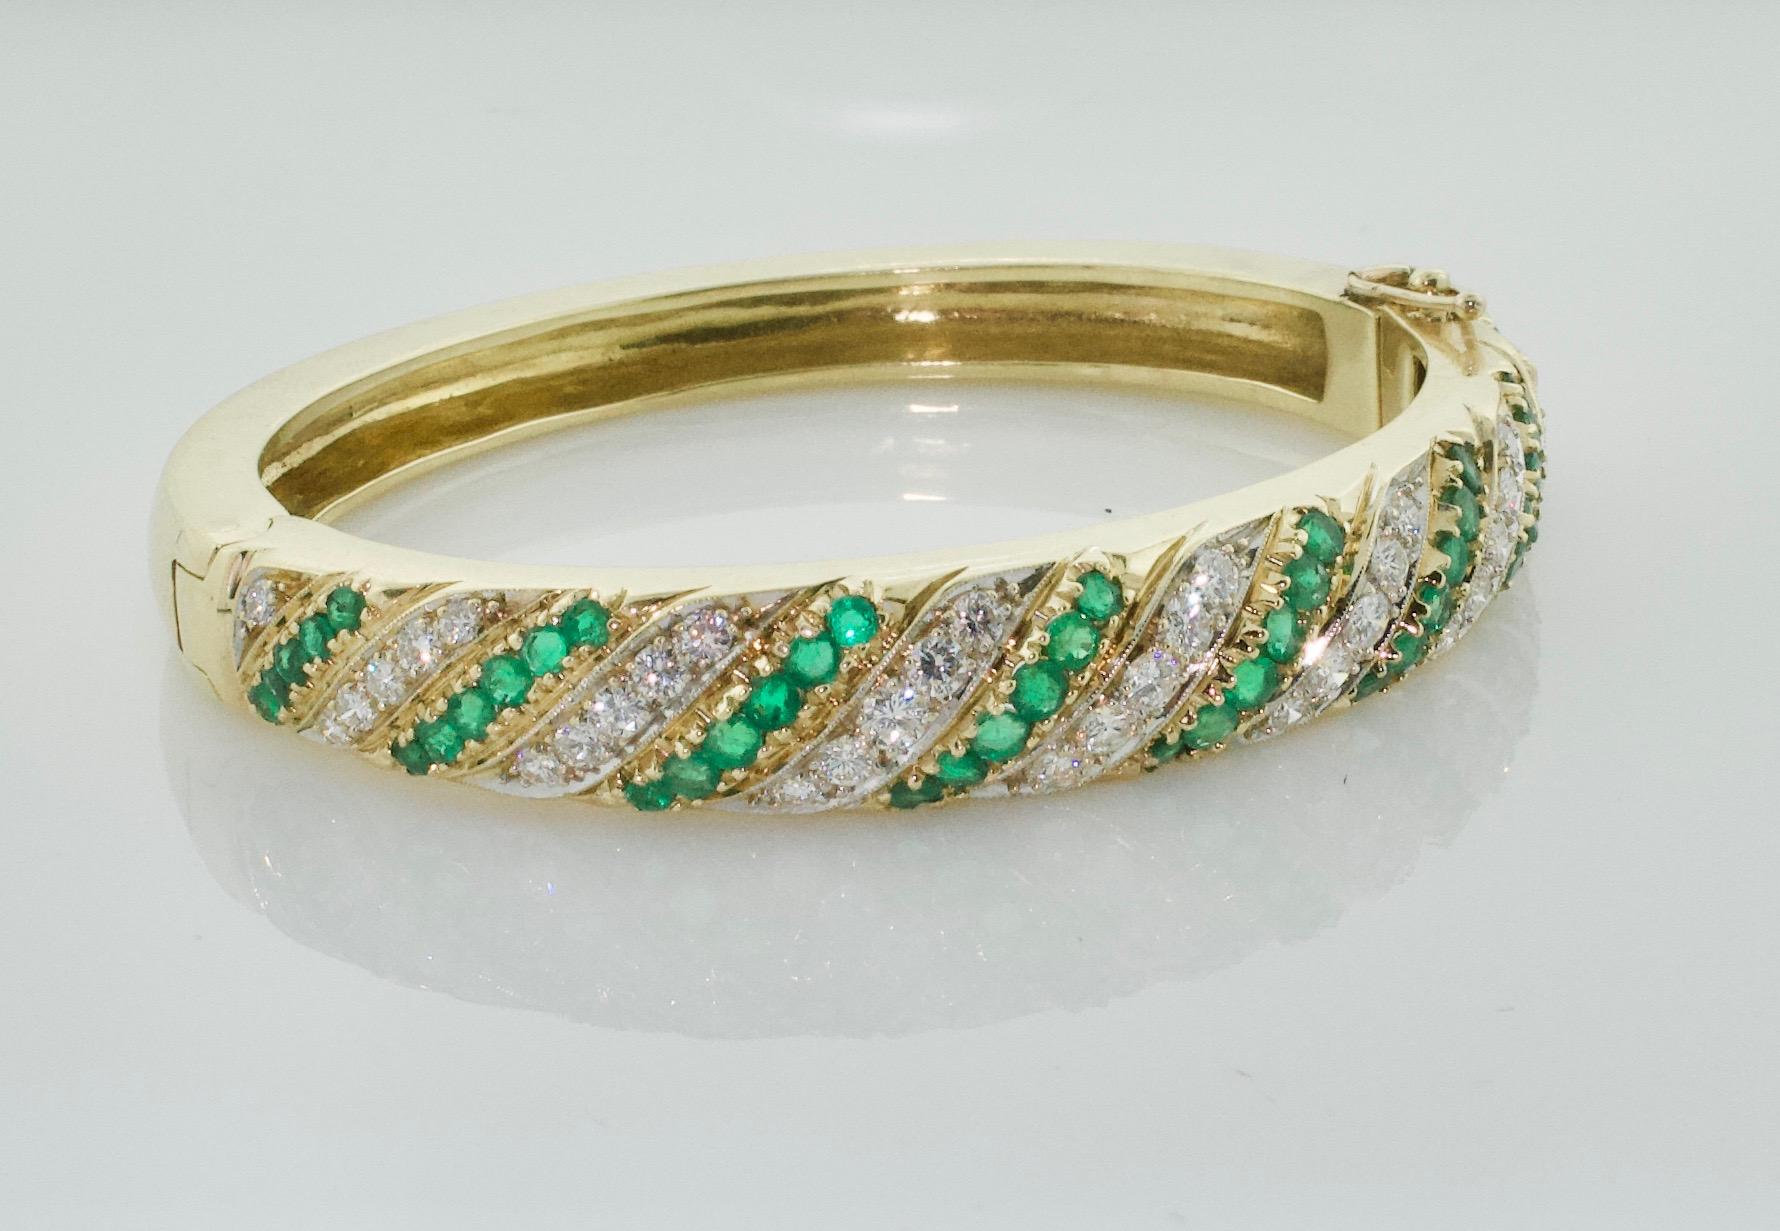 Emerald and Diamond Bangle Bracelet Circa 1960's
containing 37 full-cut diamonds [H-J/VS-SI] weighing approximately 2.15 carats total; and 46 round-cut emeralds weighing approximately 1.70 carats total; 49.4 grams; approximately 6 1/4 inches inner